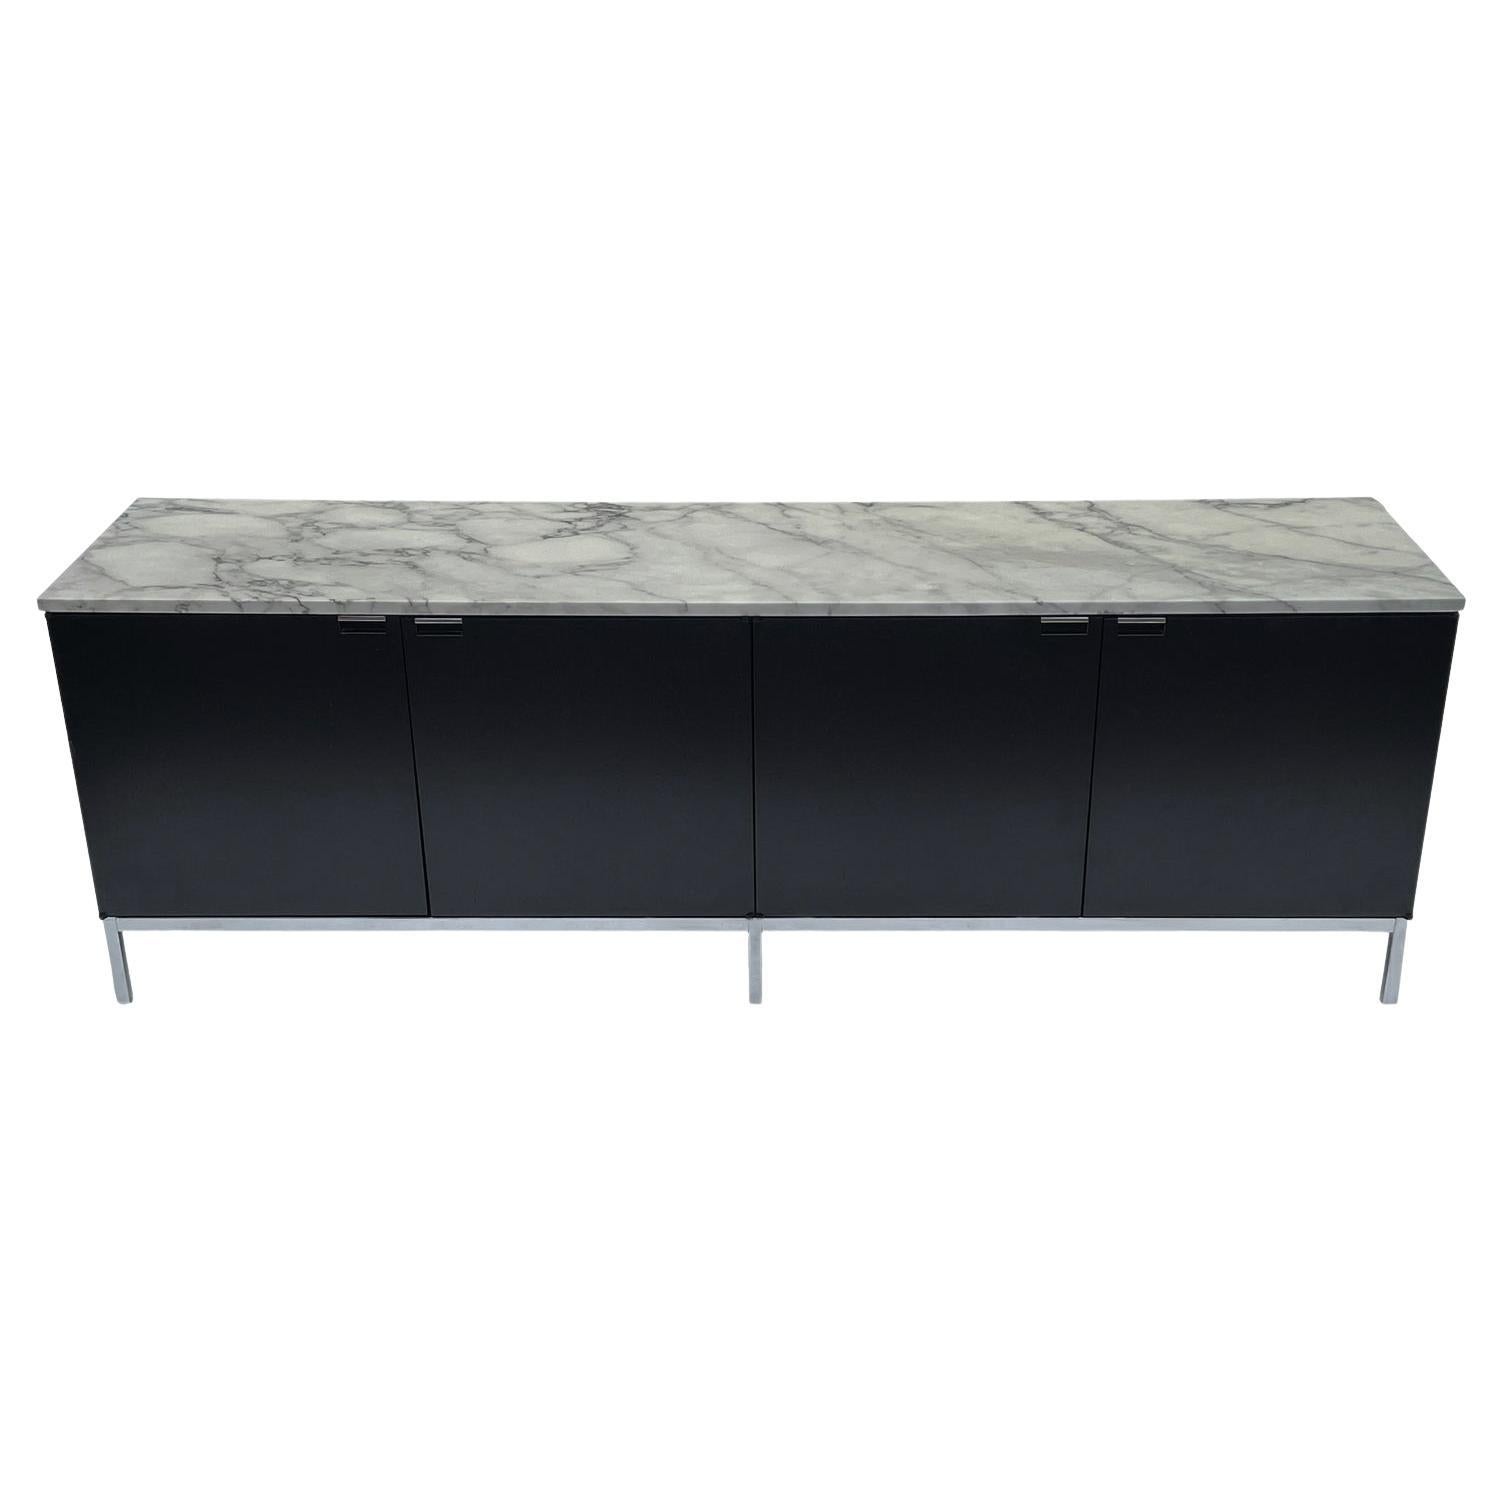 Mid-Century Modern Florence Knoll Marble Credenza or Media Cabinet in Ebony Wood